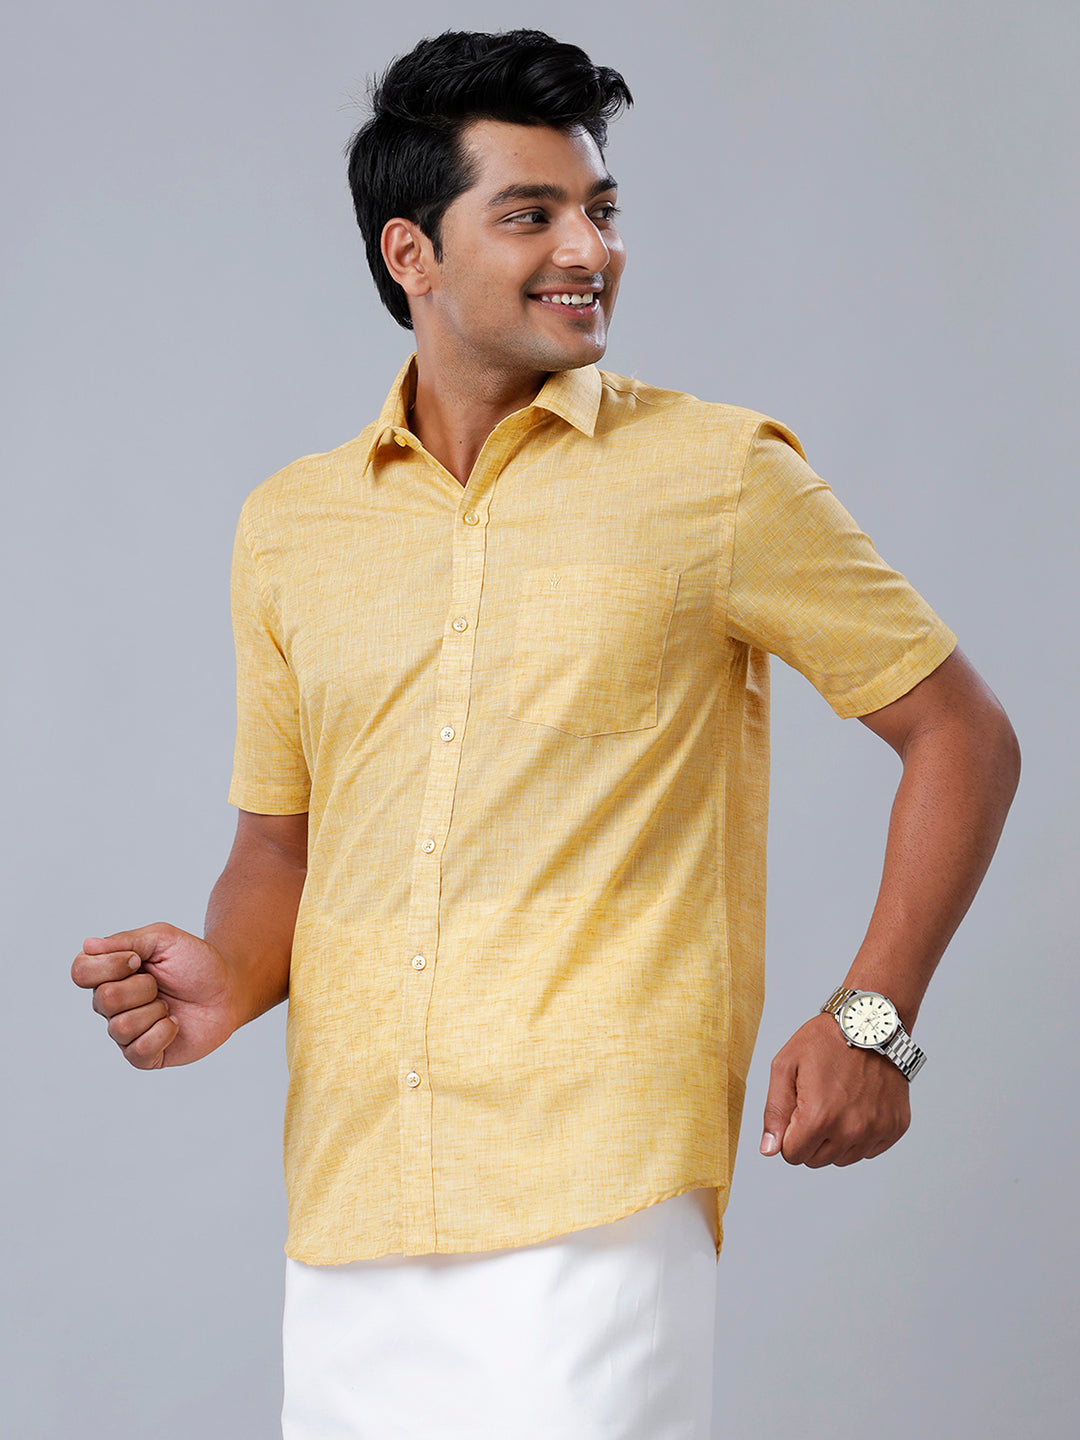 Mens Formal Shirt Half Sleeves Yellow T39 TO2-Side view